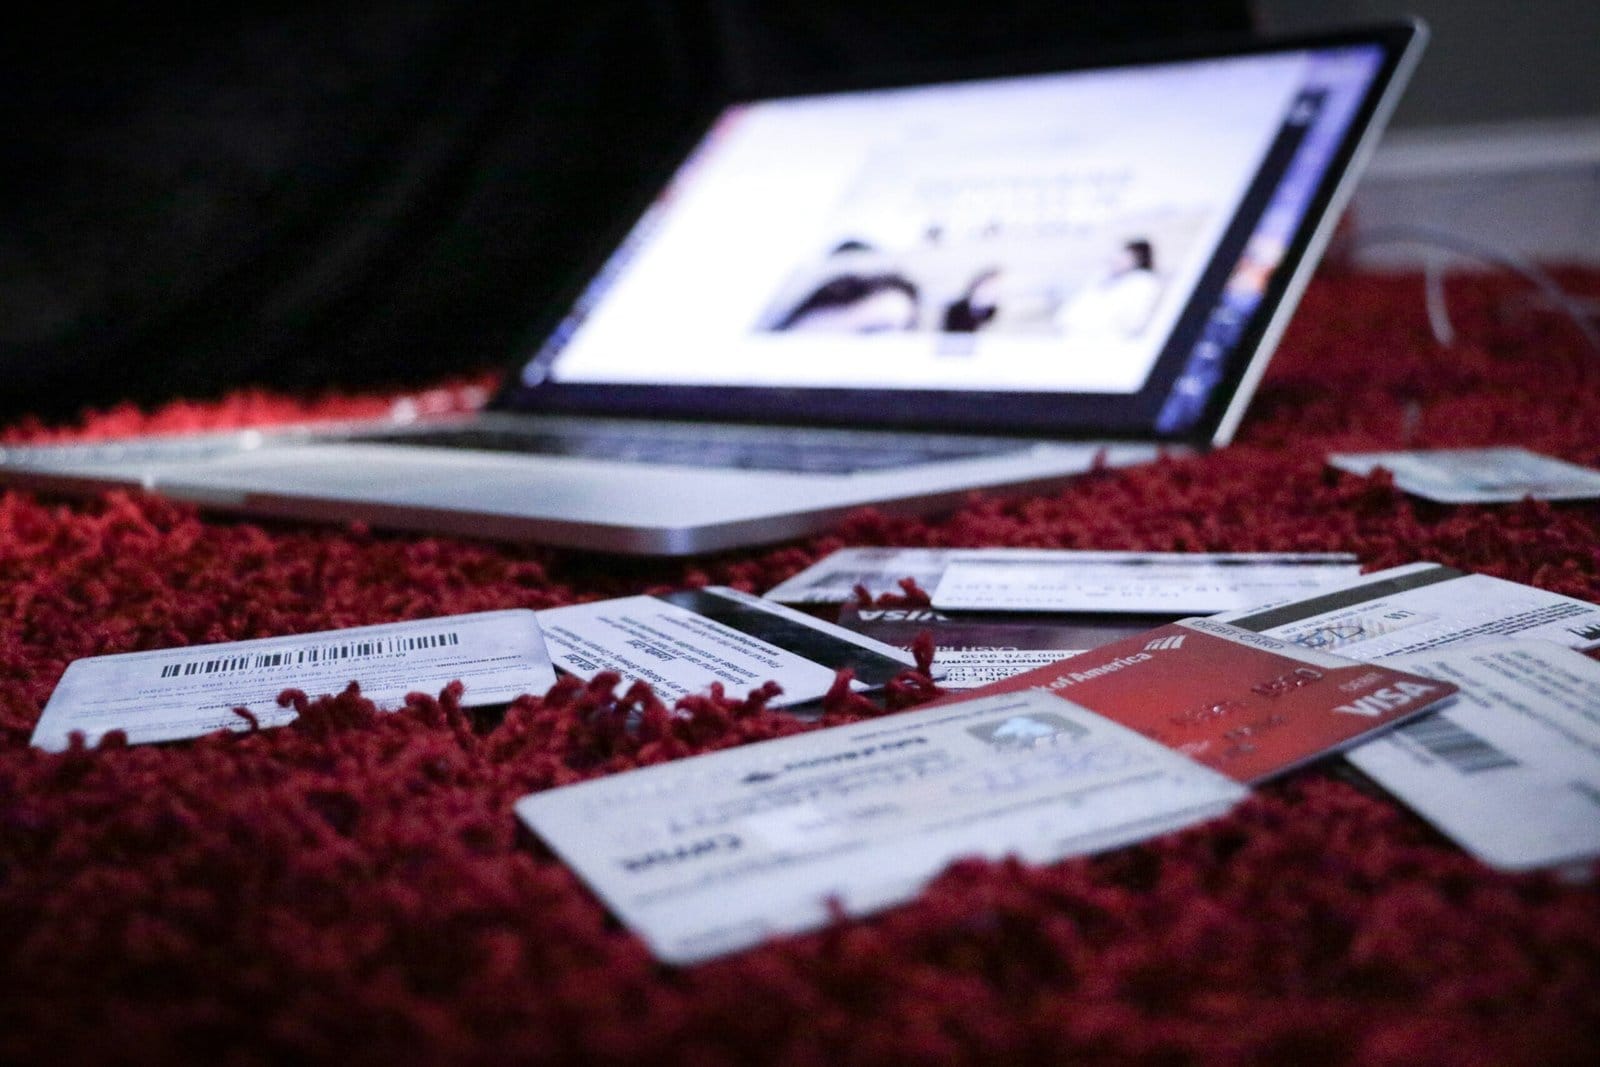 A laptop is sitting on a red carpet with tickets on it. New Credit Score